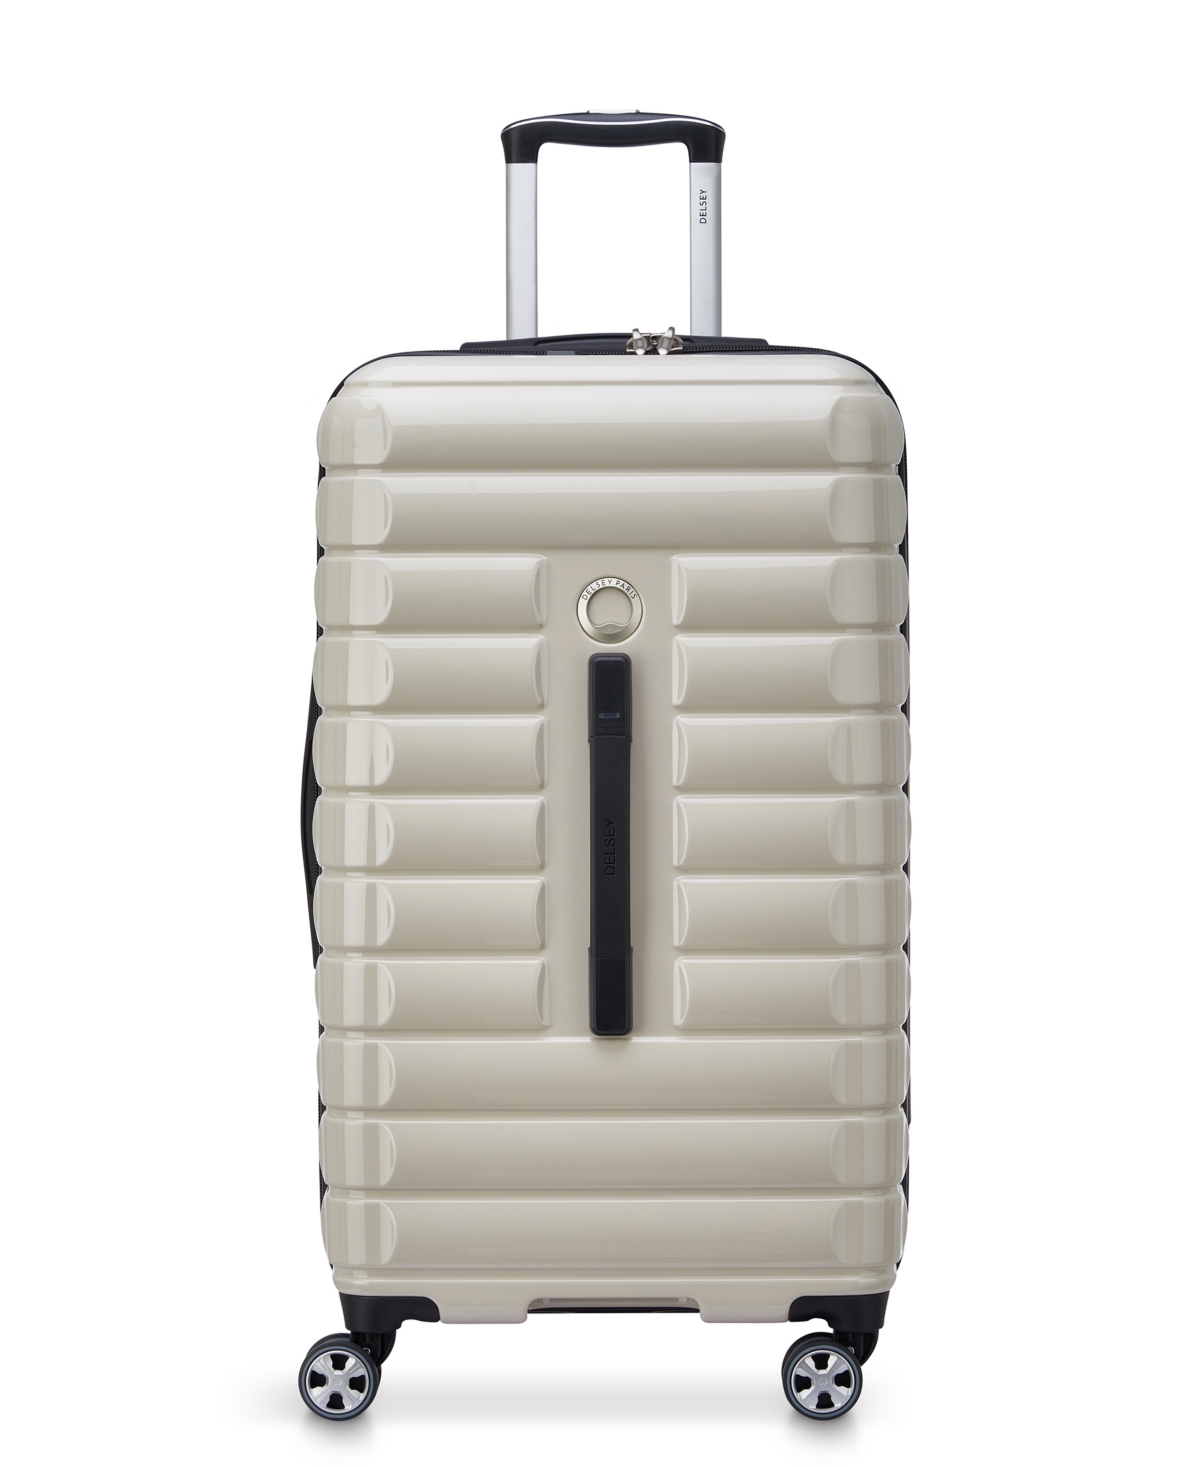 Shadow 5.0 Trunk 27" Spinner Luggage - Silver Pine